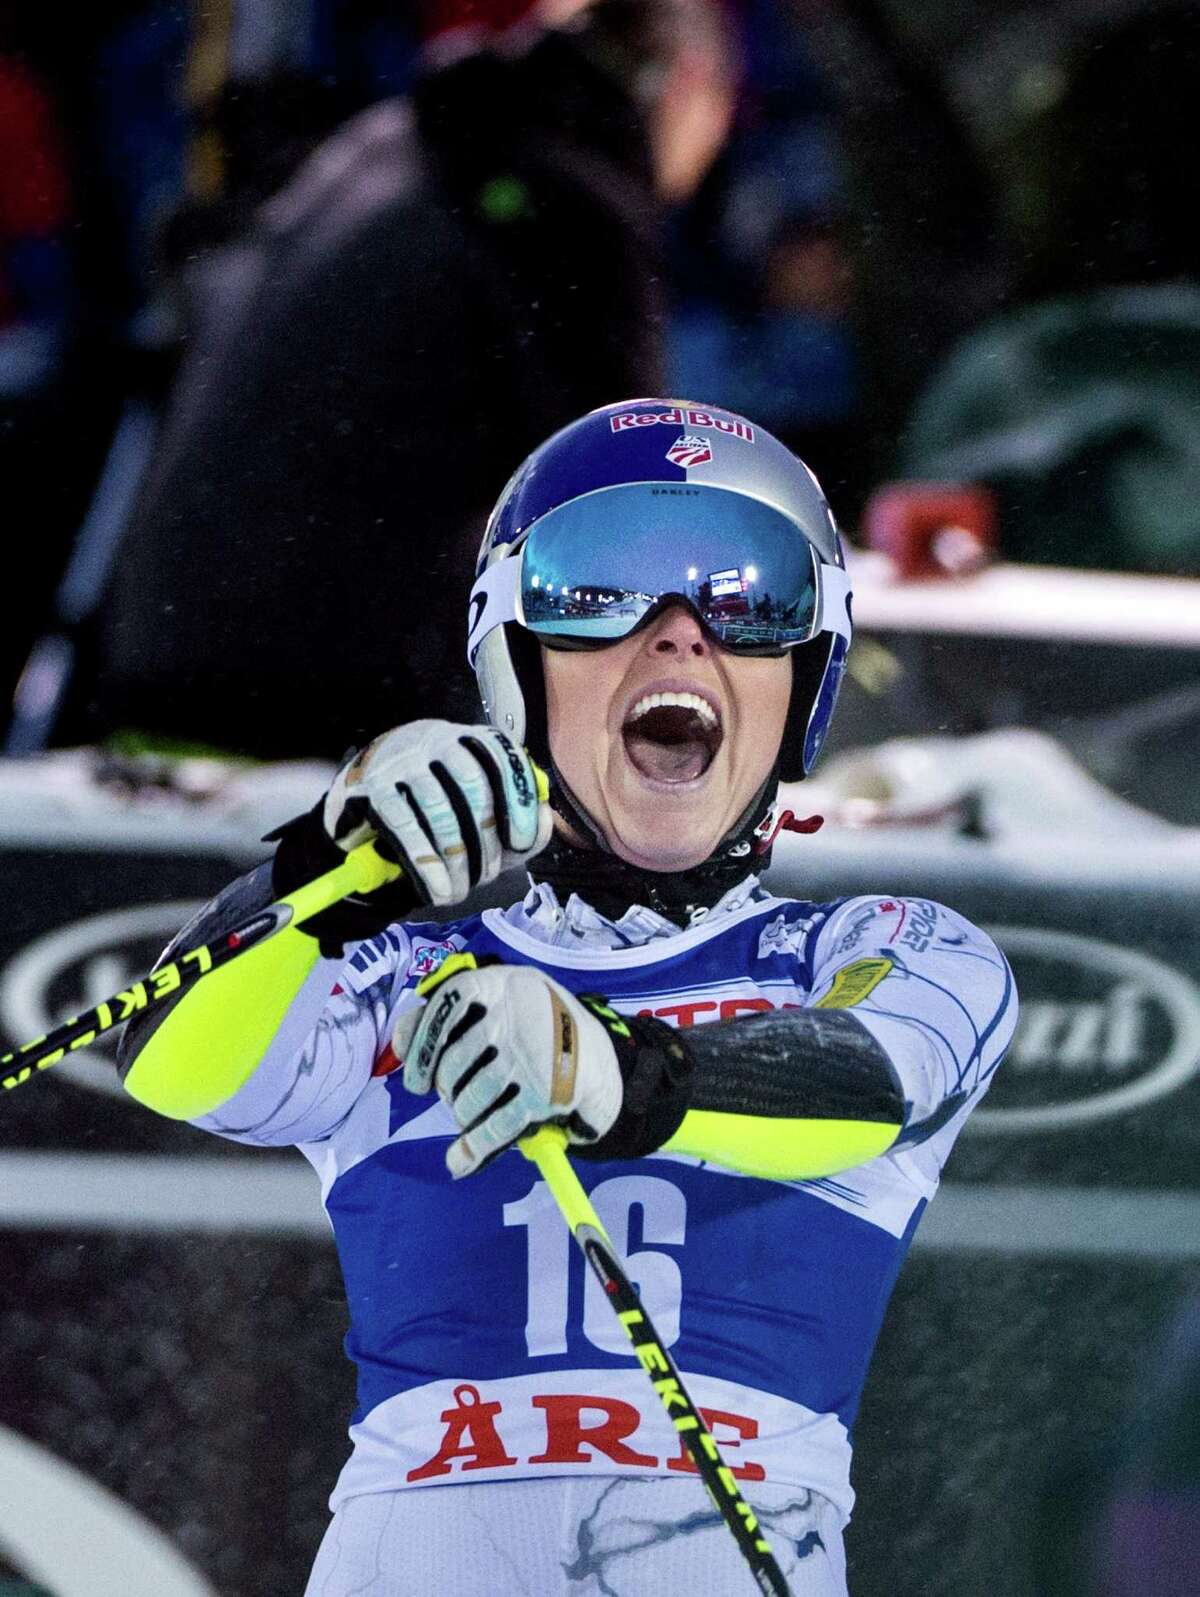 Lindsey Vonn whoops it up after winning a World Cup giant slalom at Are, Sweden. It was her fourth consecutive victory in the last two weeks.